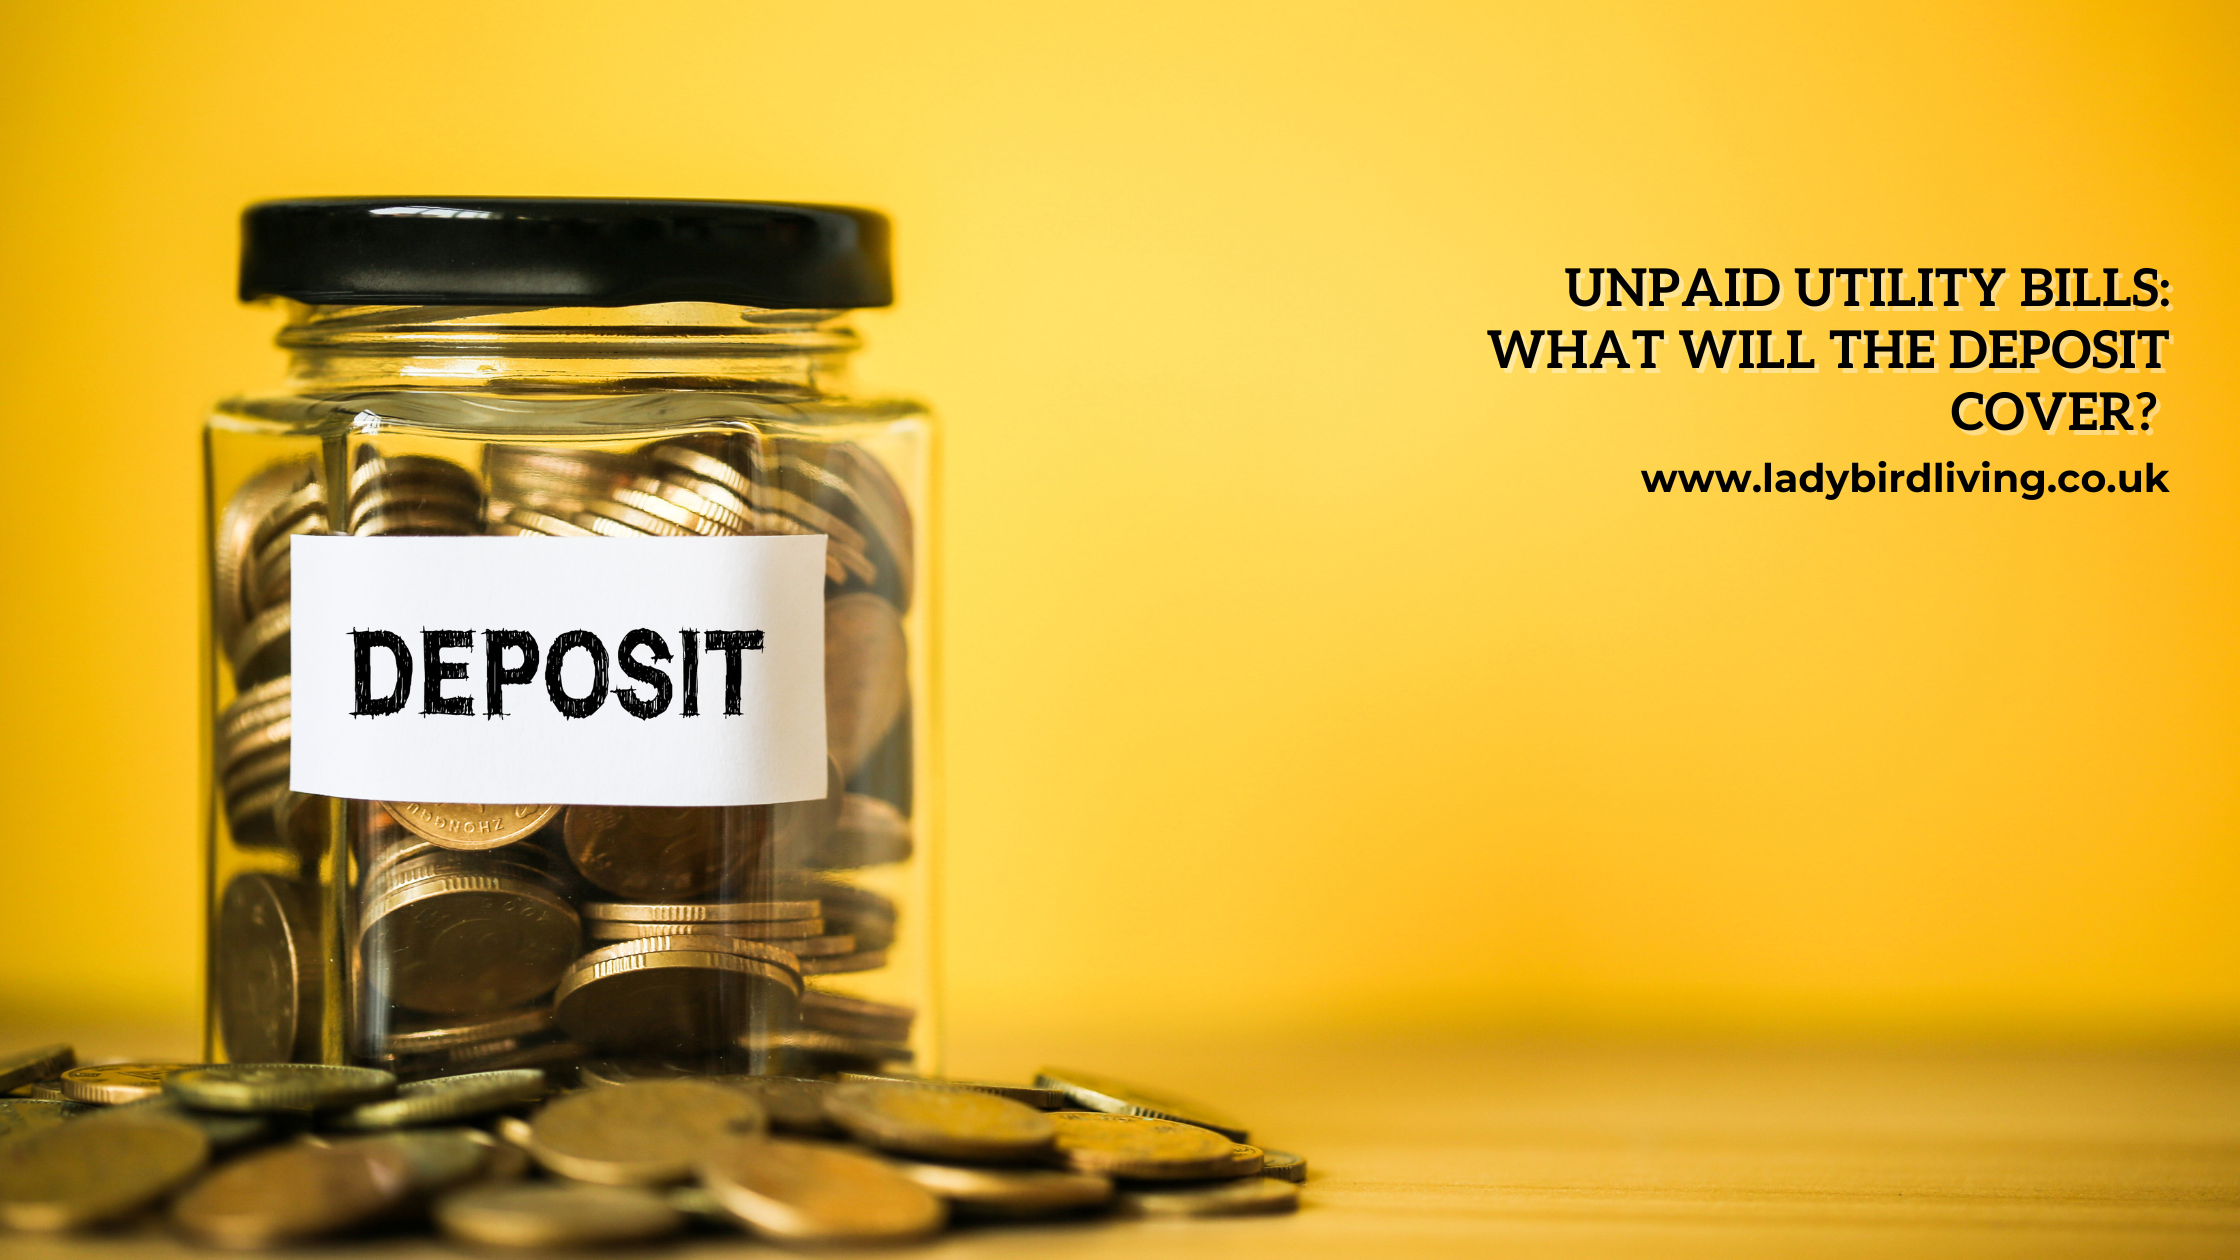 Unpaid utility bills: What will the deposit cover?